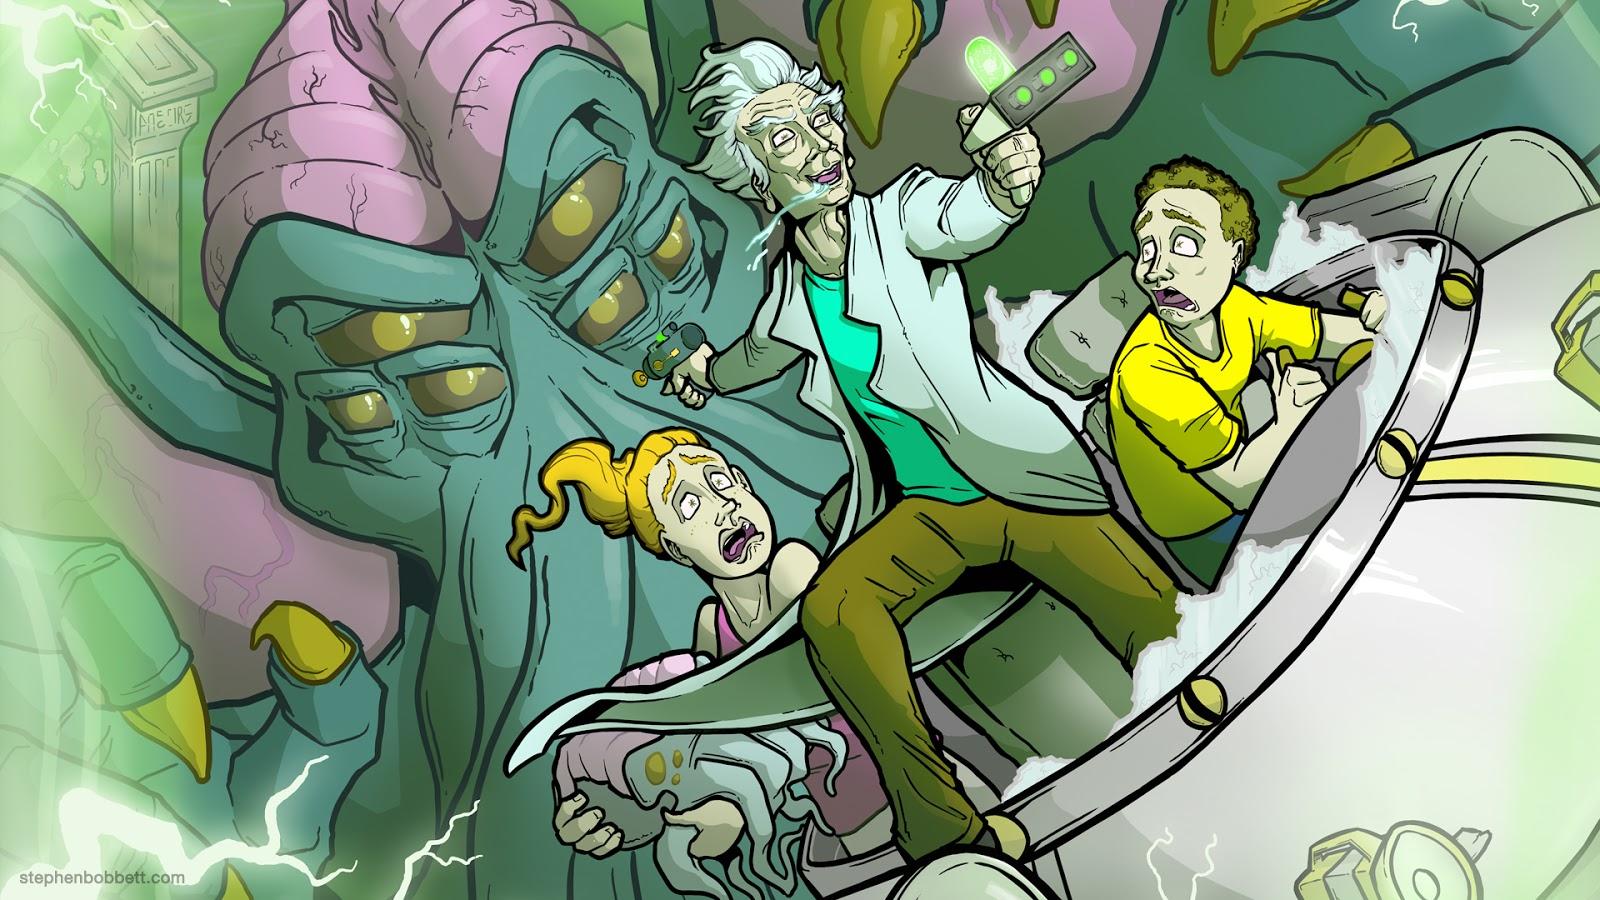 1080p Rick and Morty HD Wallpaper (2019) HD Background